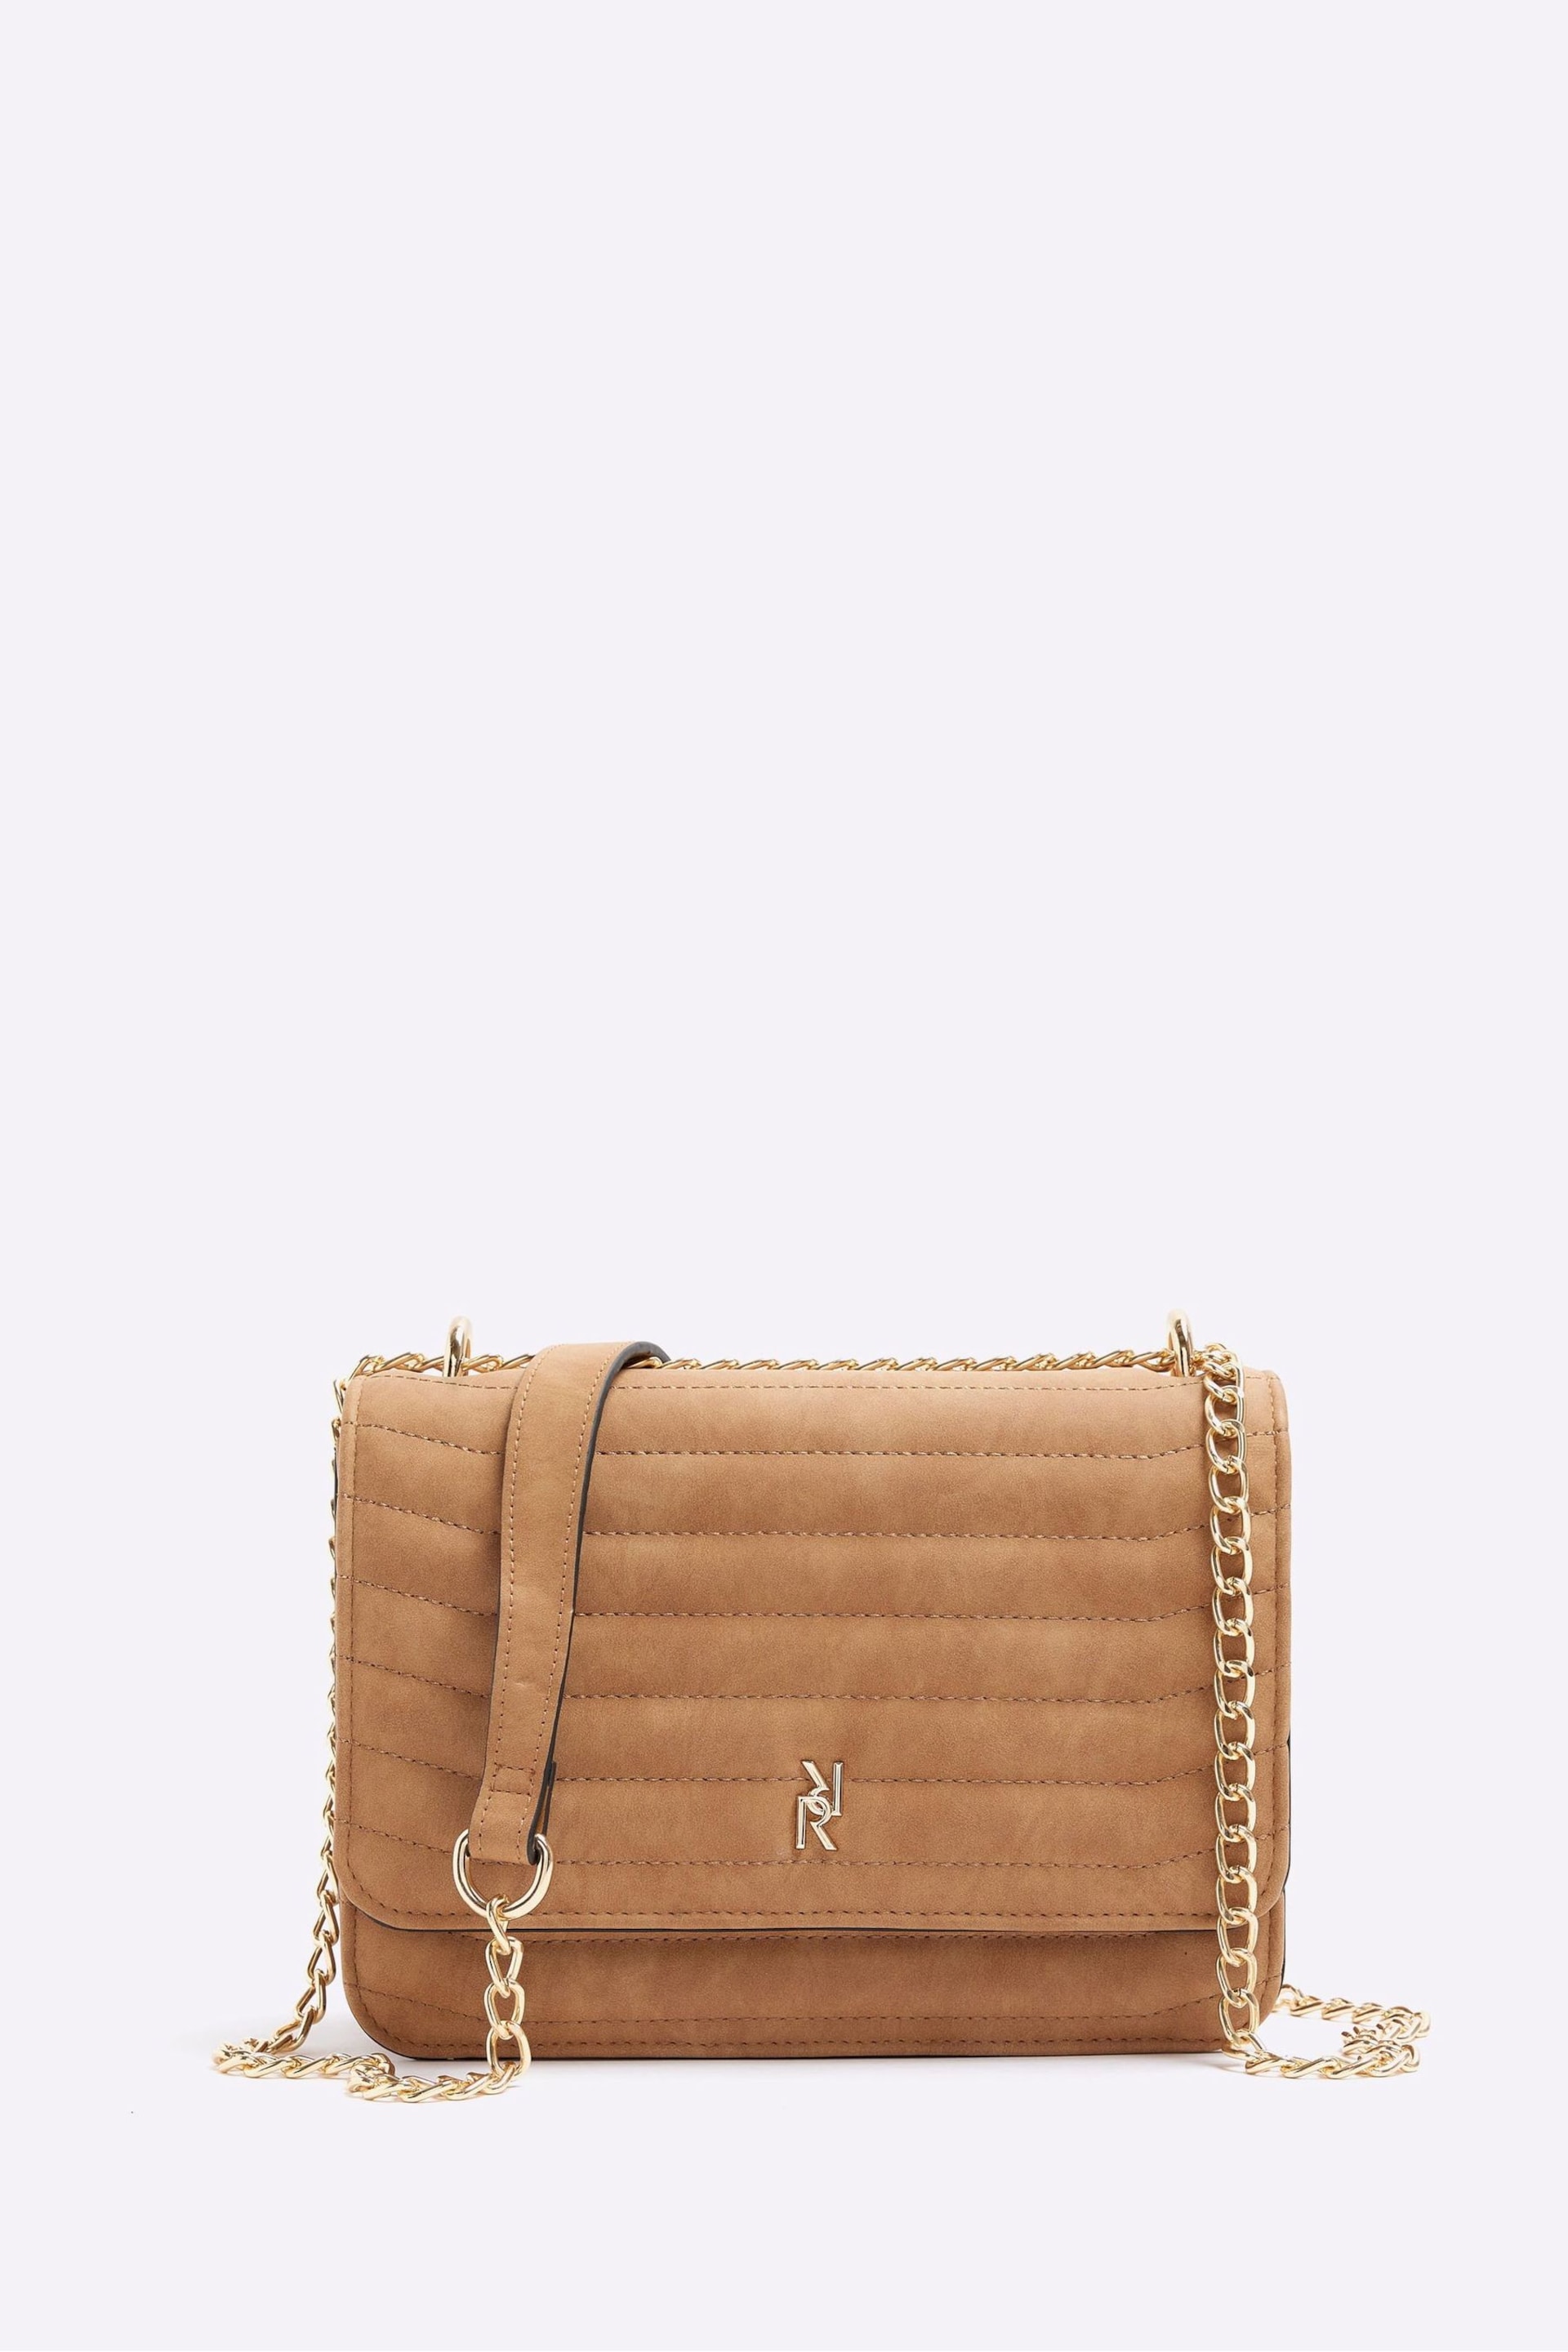 River Island Brown Quilted Chain Shoulder Bag - Image 1 of 4